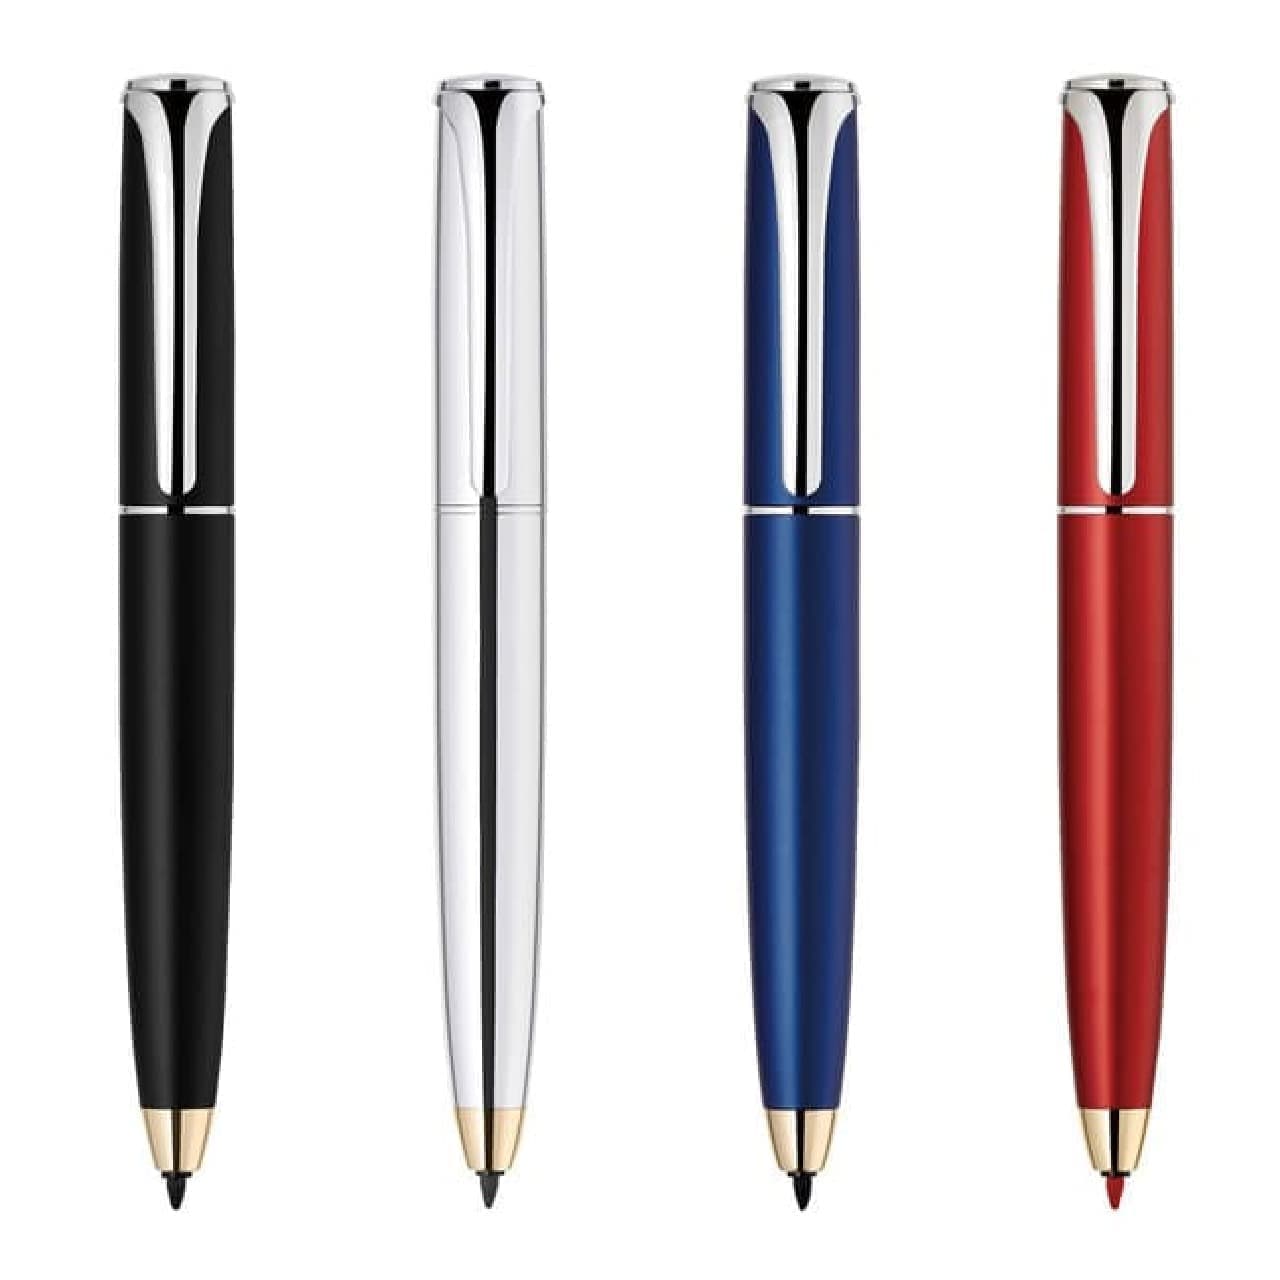 From "Filler Direction" Zebra --Business felt-tip pen that is easy to use for video conferences